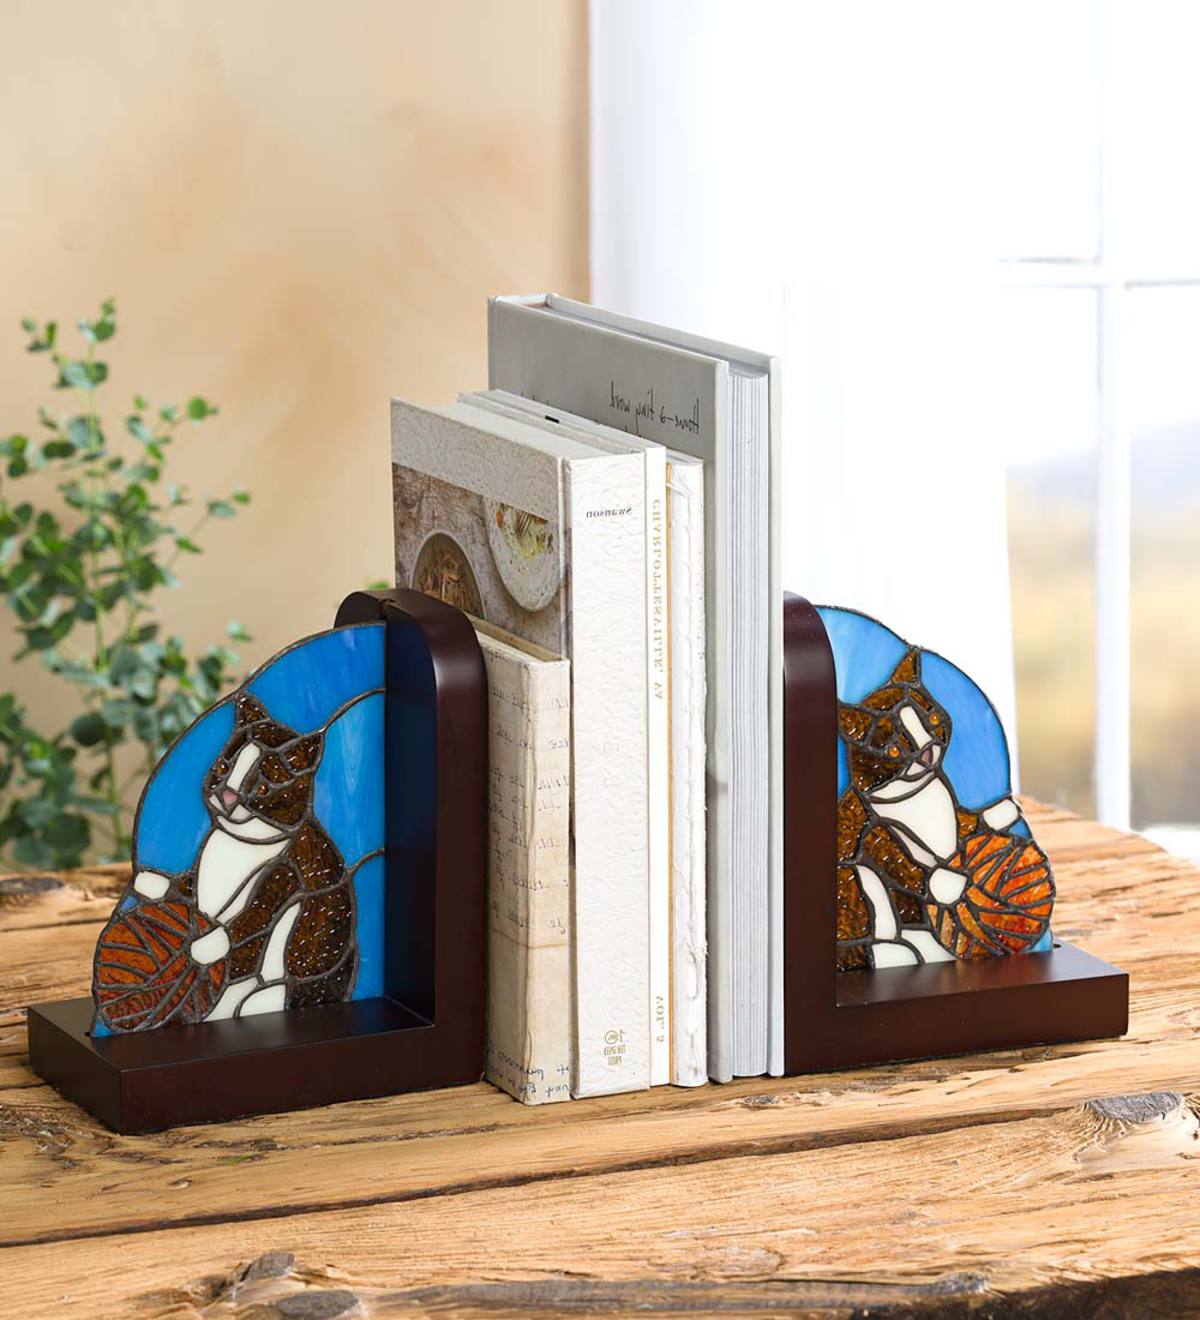 Stained Glass Cat Bookends, Set of 2